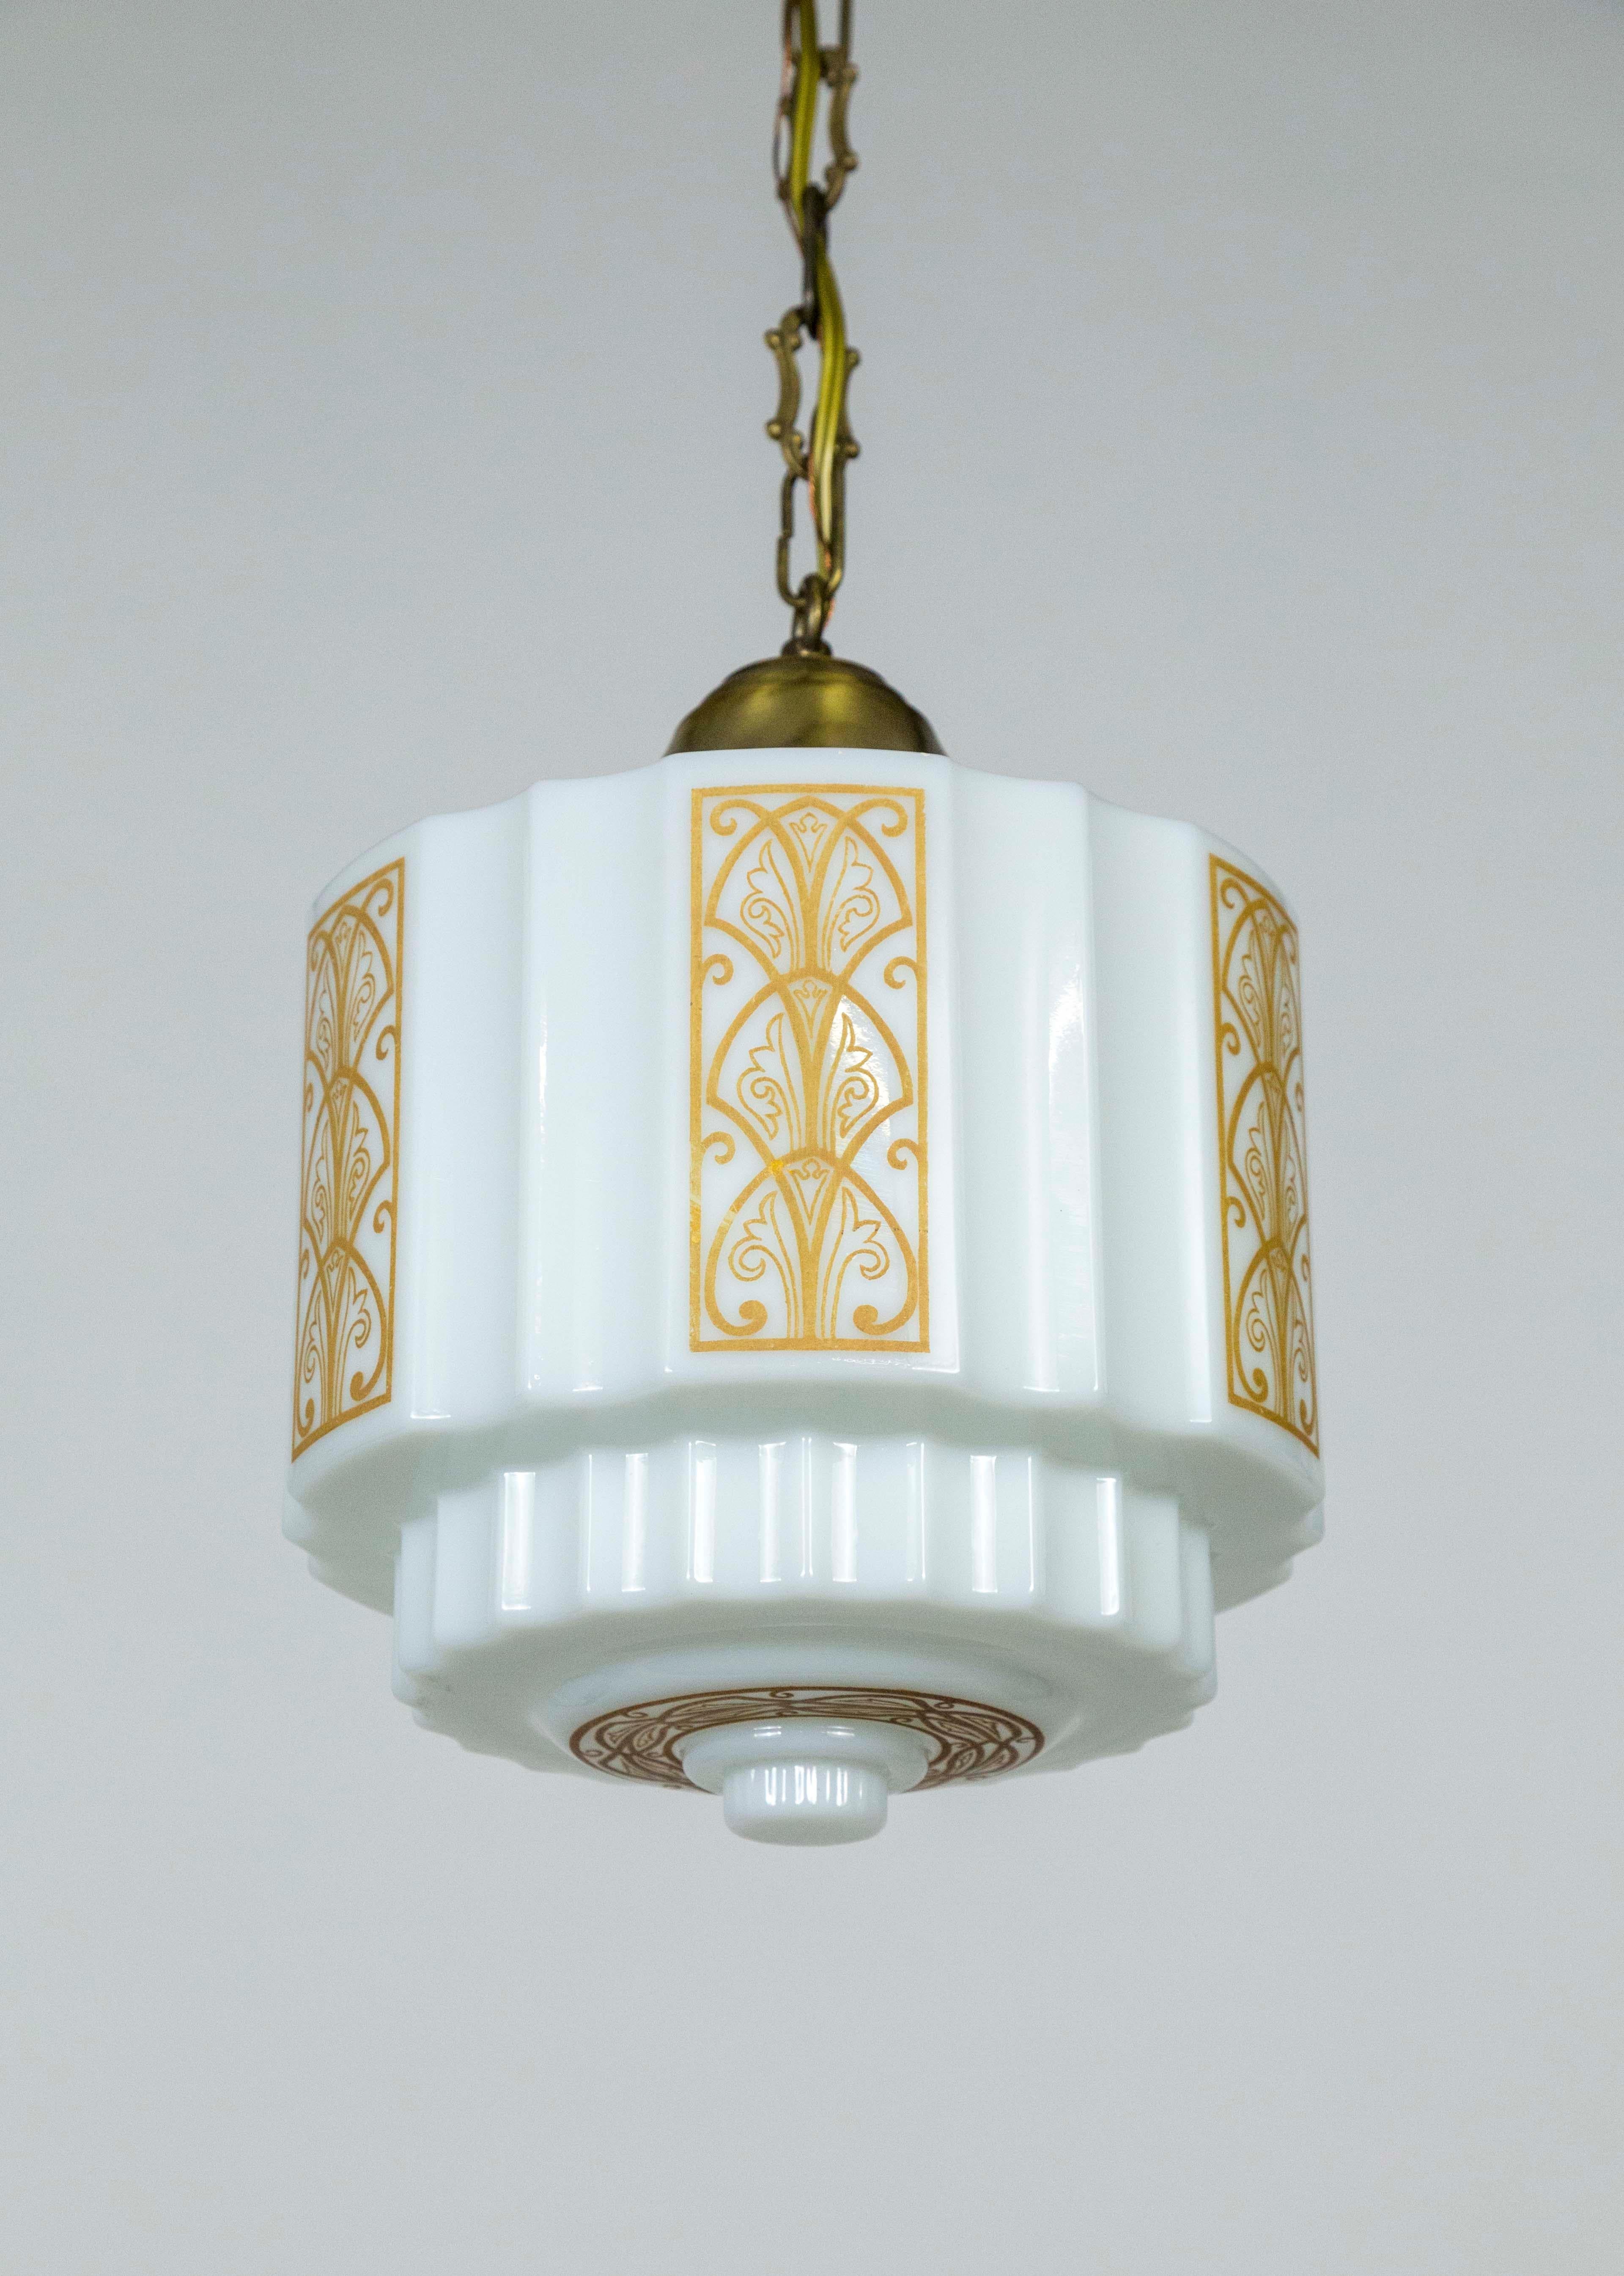 Early 20th Century Art Deco Milk Glass Stepped Pendant Light w/ Amber Painted Motif